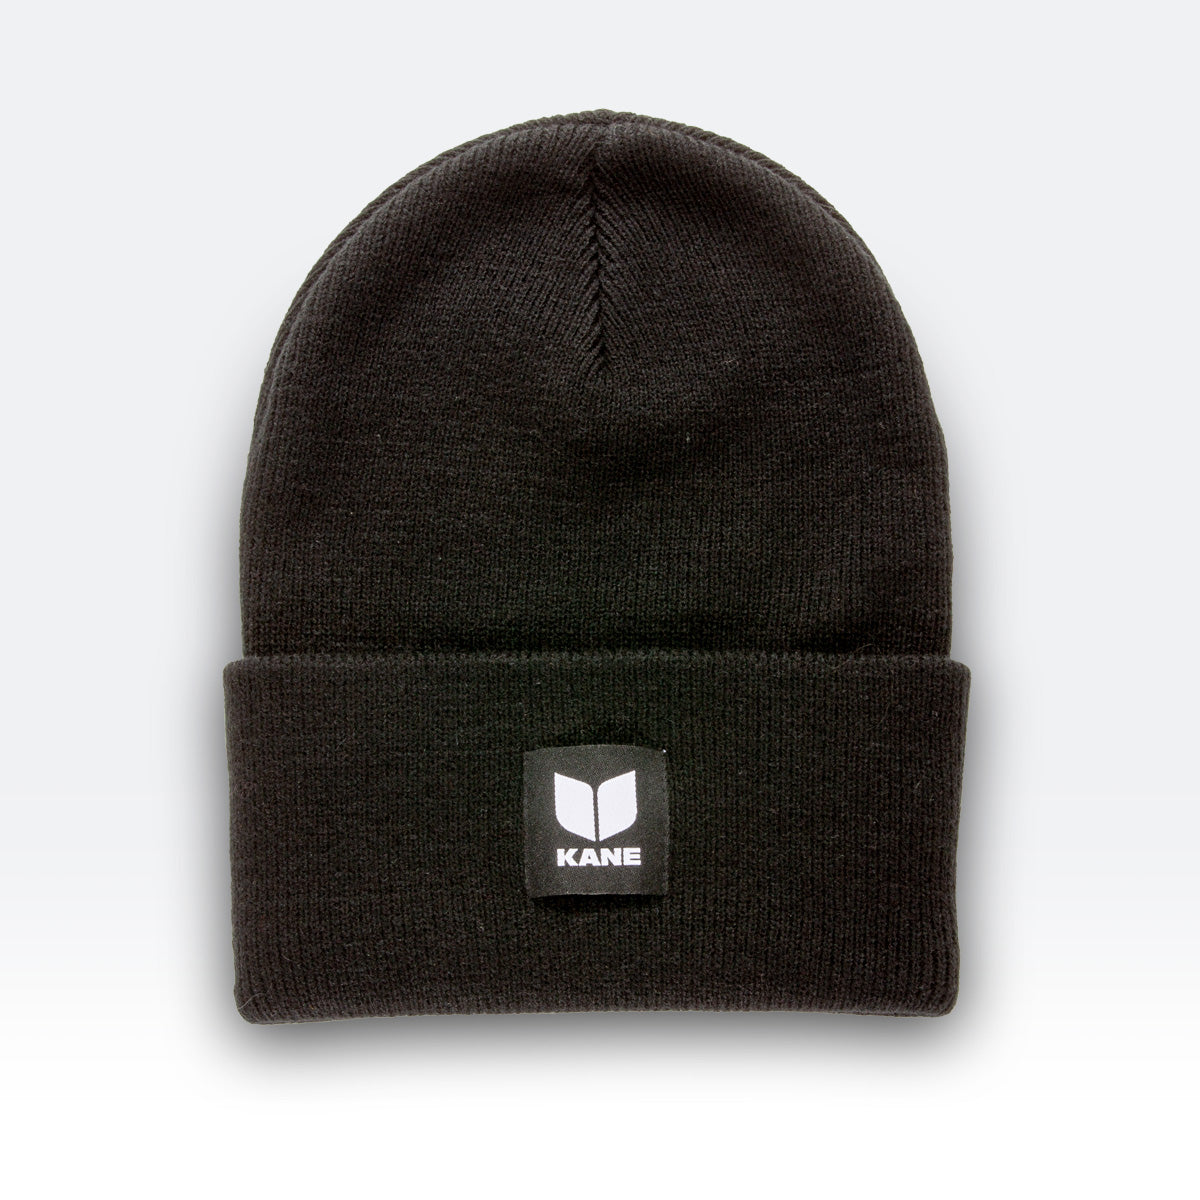 Load image into Gallery viewer, Kane Cuffed Beanie- Black
